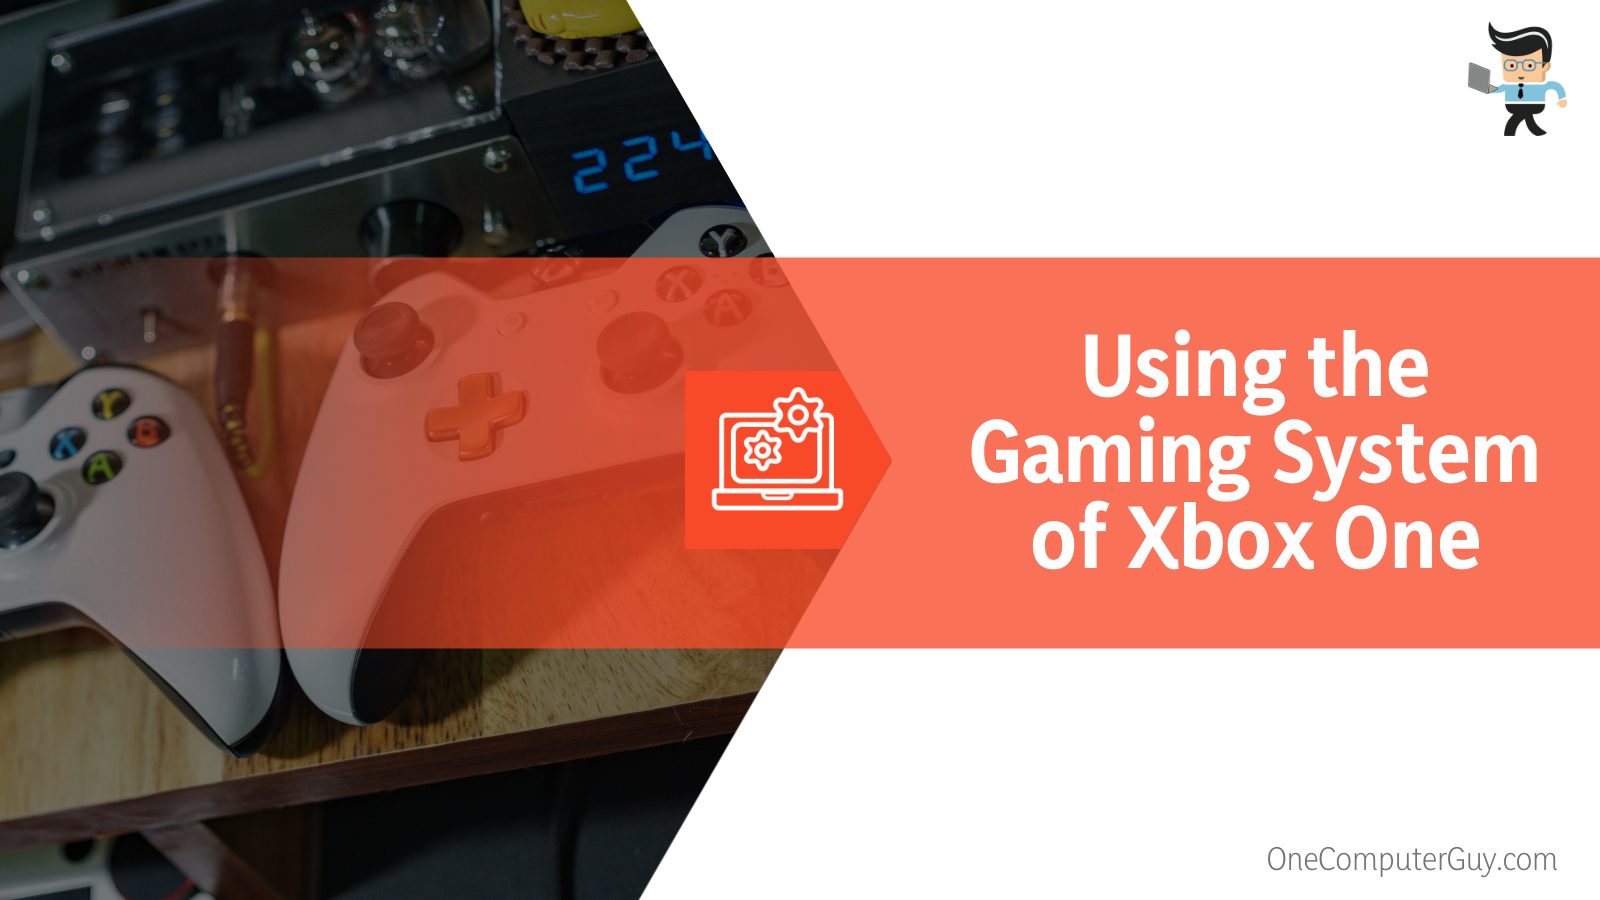 Using the Gaming System of Xbox One